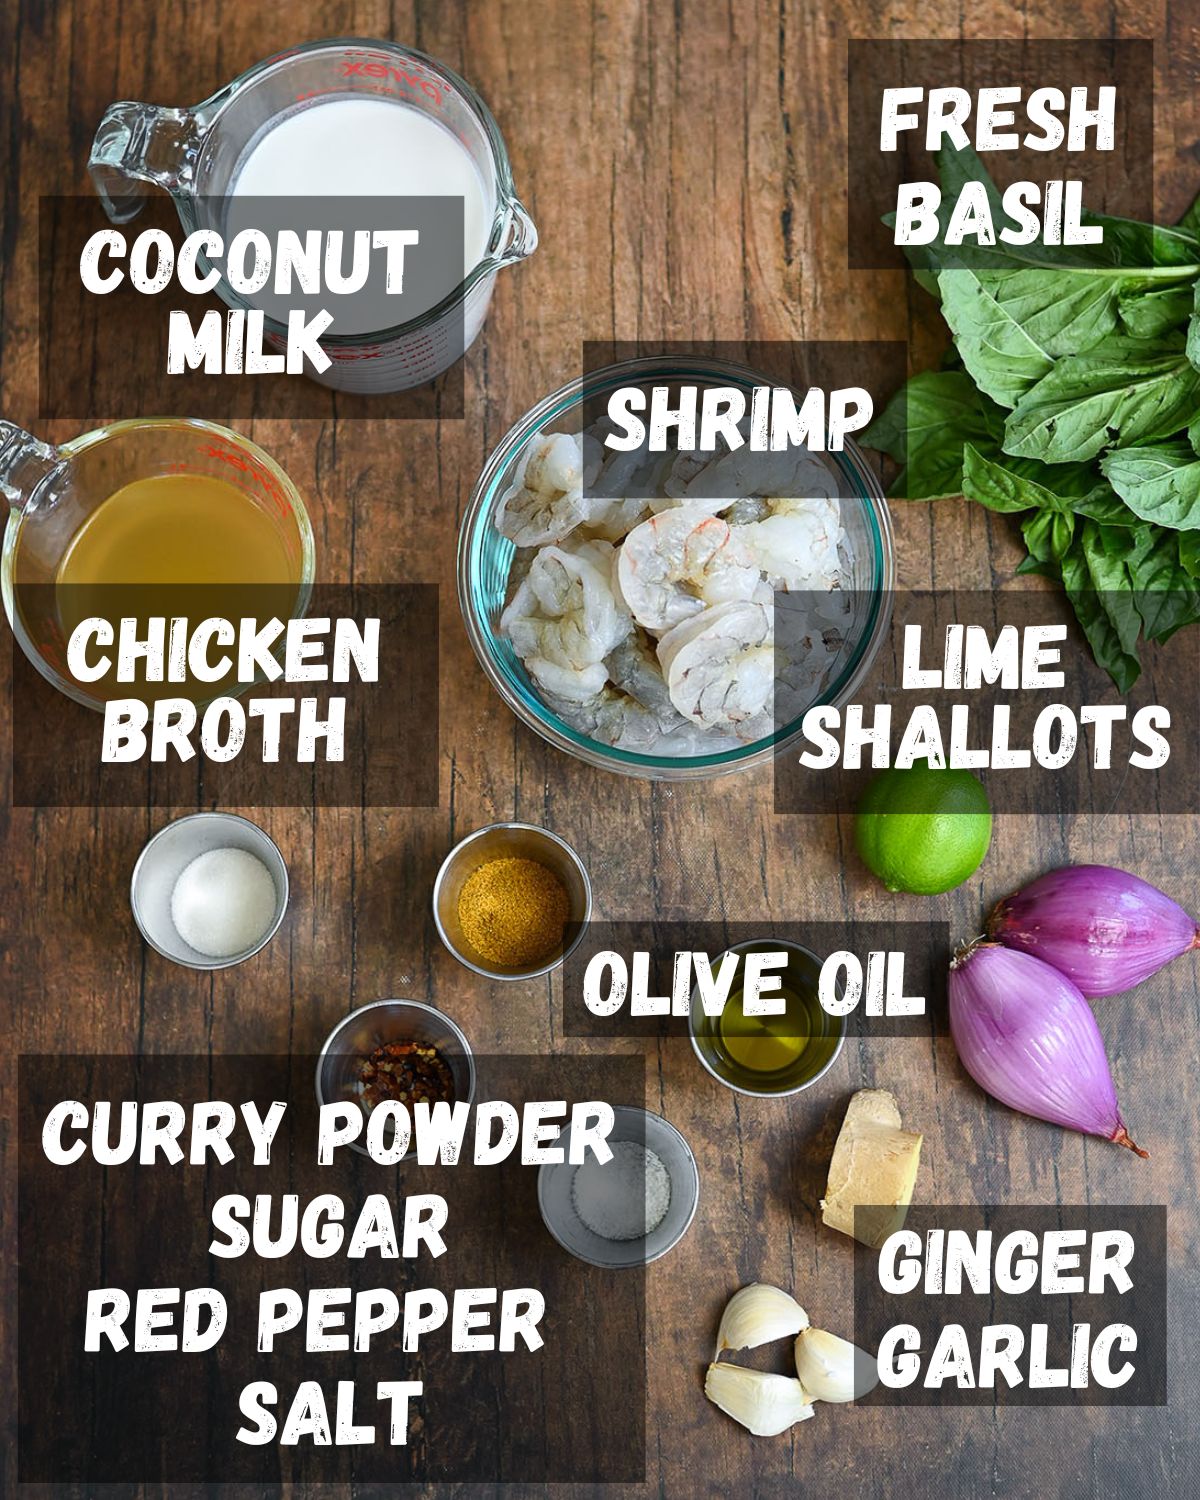 Ingredients shown for curry shrimp.